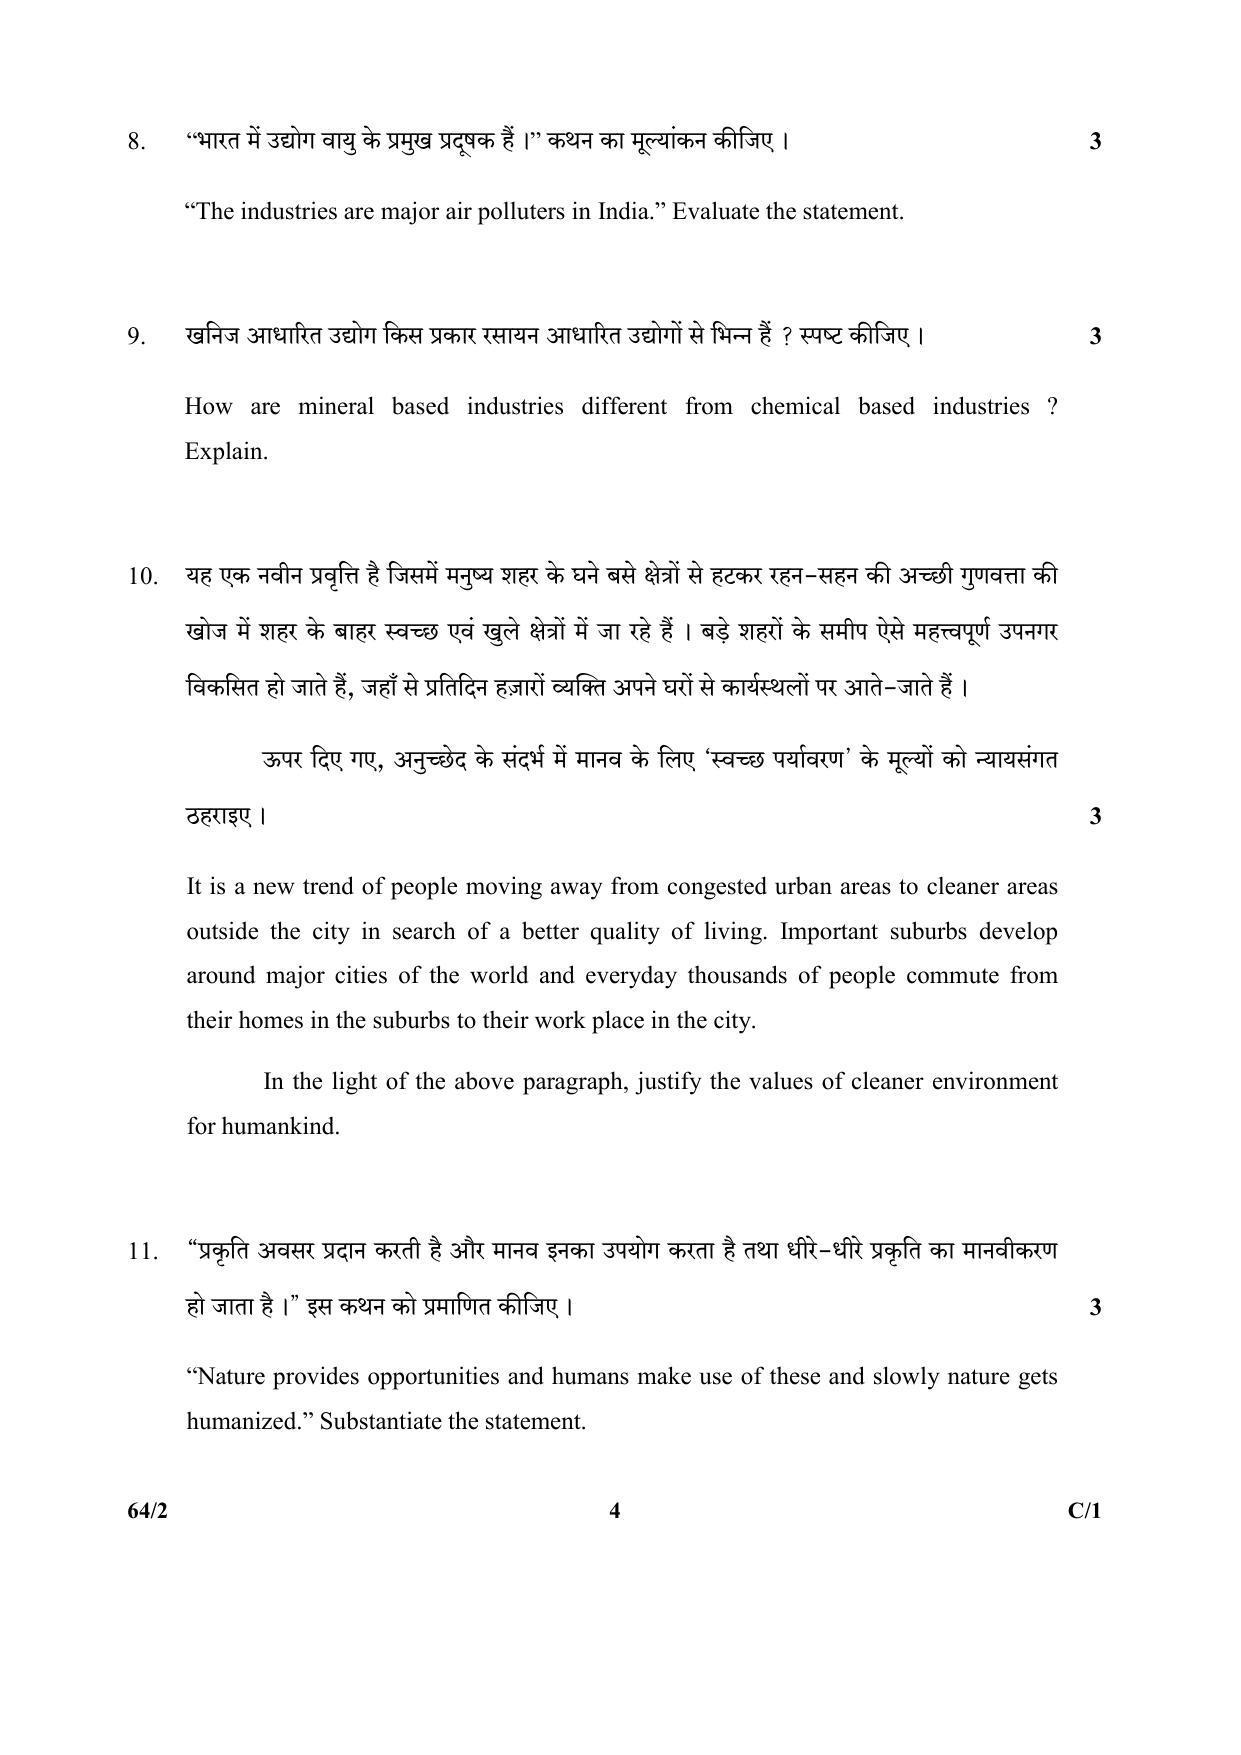 CBSE Class 12 64-2 (Geography) 2018 Compartment Question Paper - Page 4